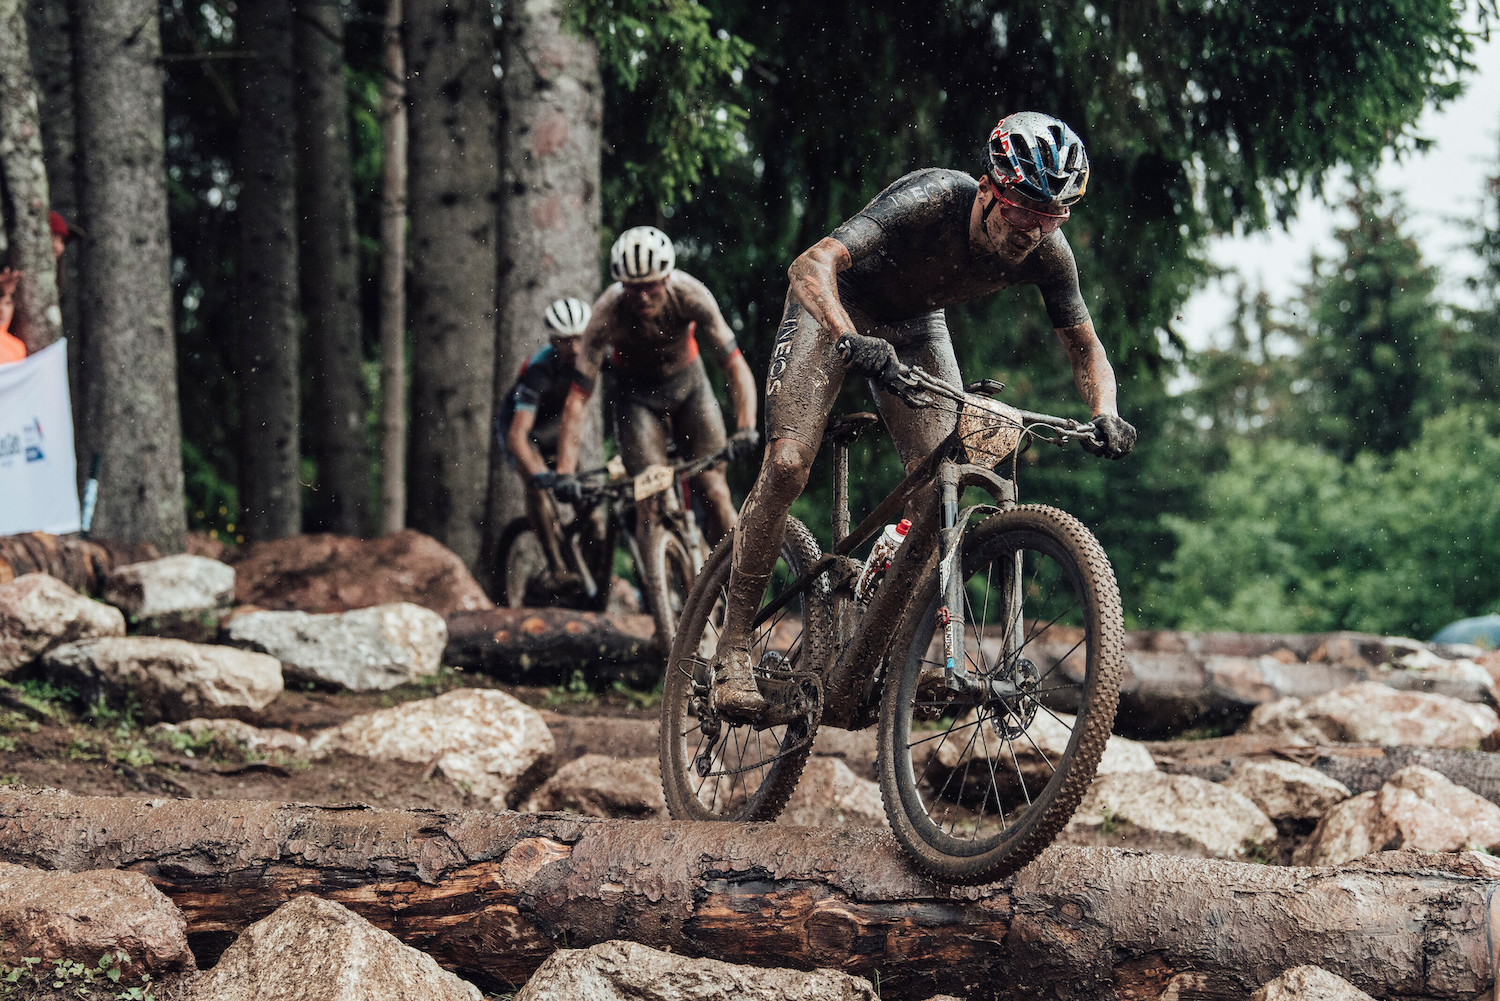 Les Gets World Cup XCO